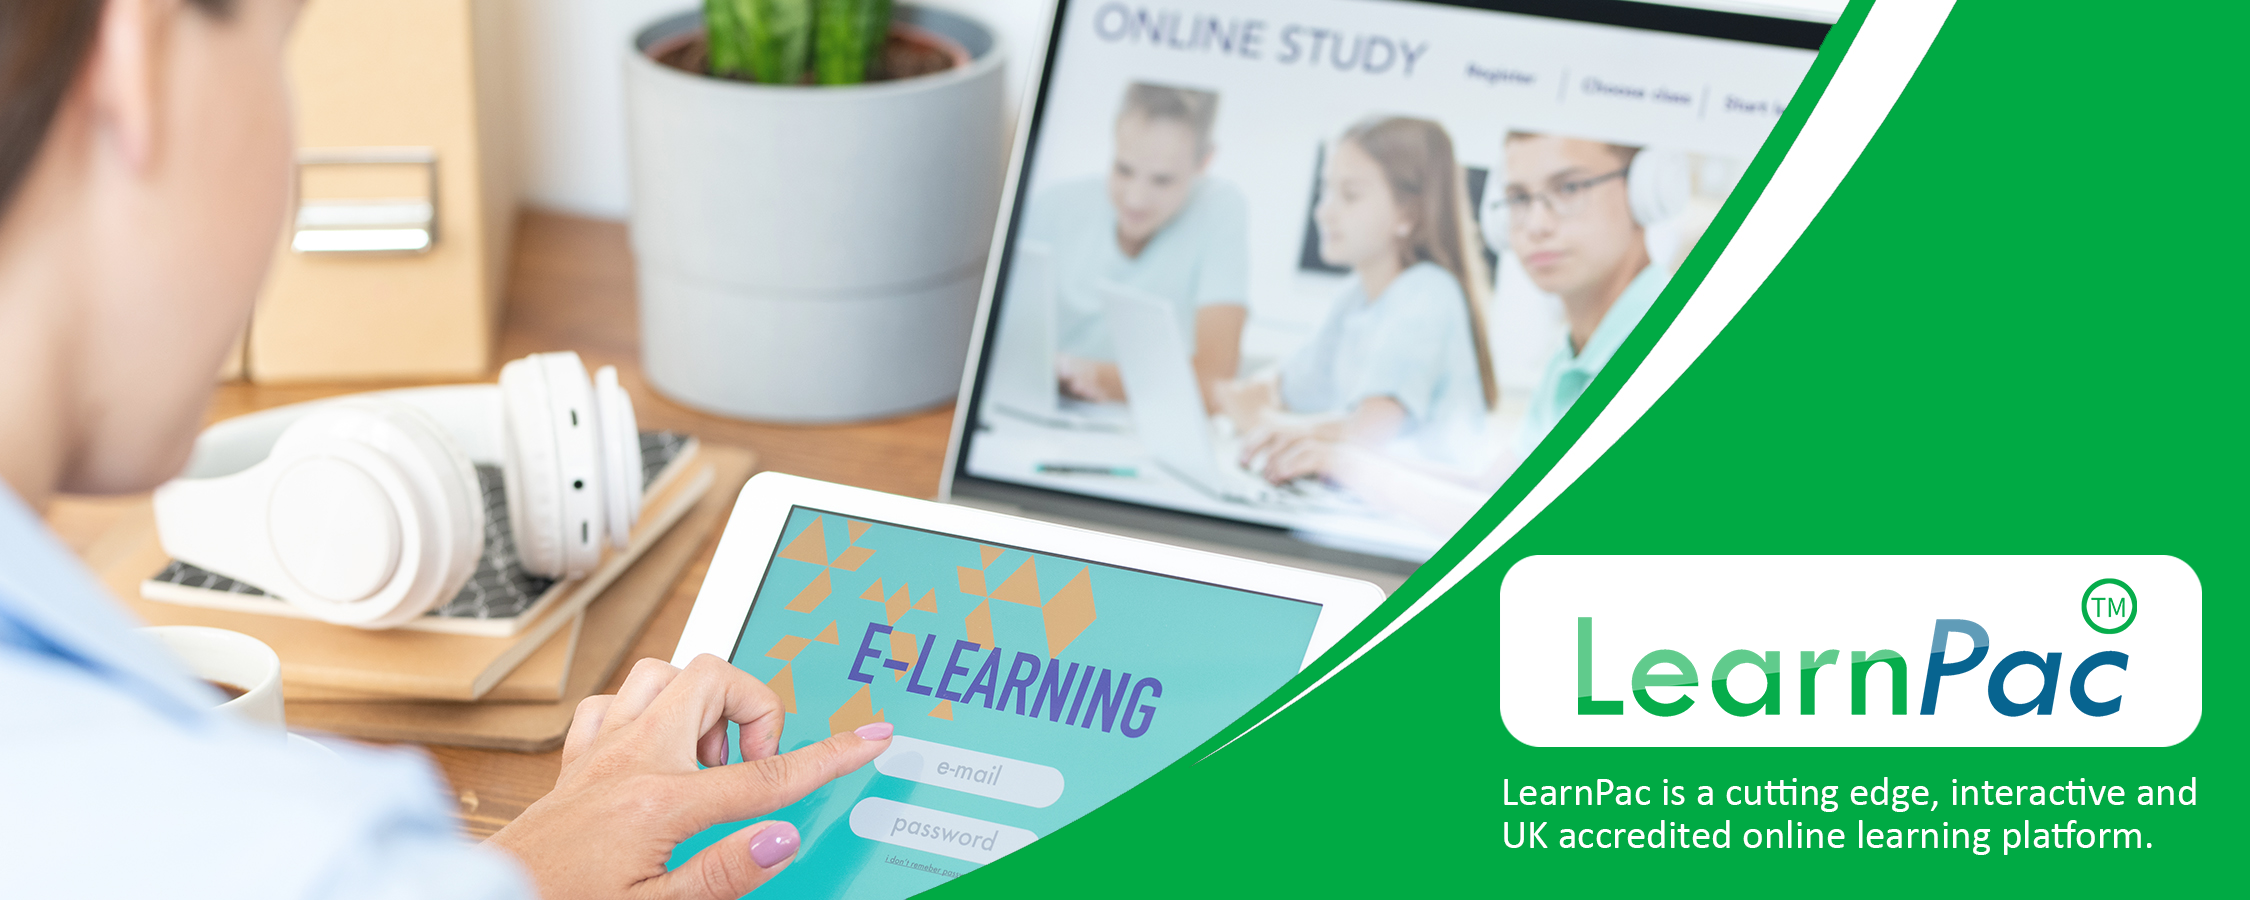 Anaphylaxis Training for Schools - Online Learning Courses - E-Learning Courses - LearnPac Systems UK -